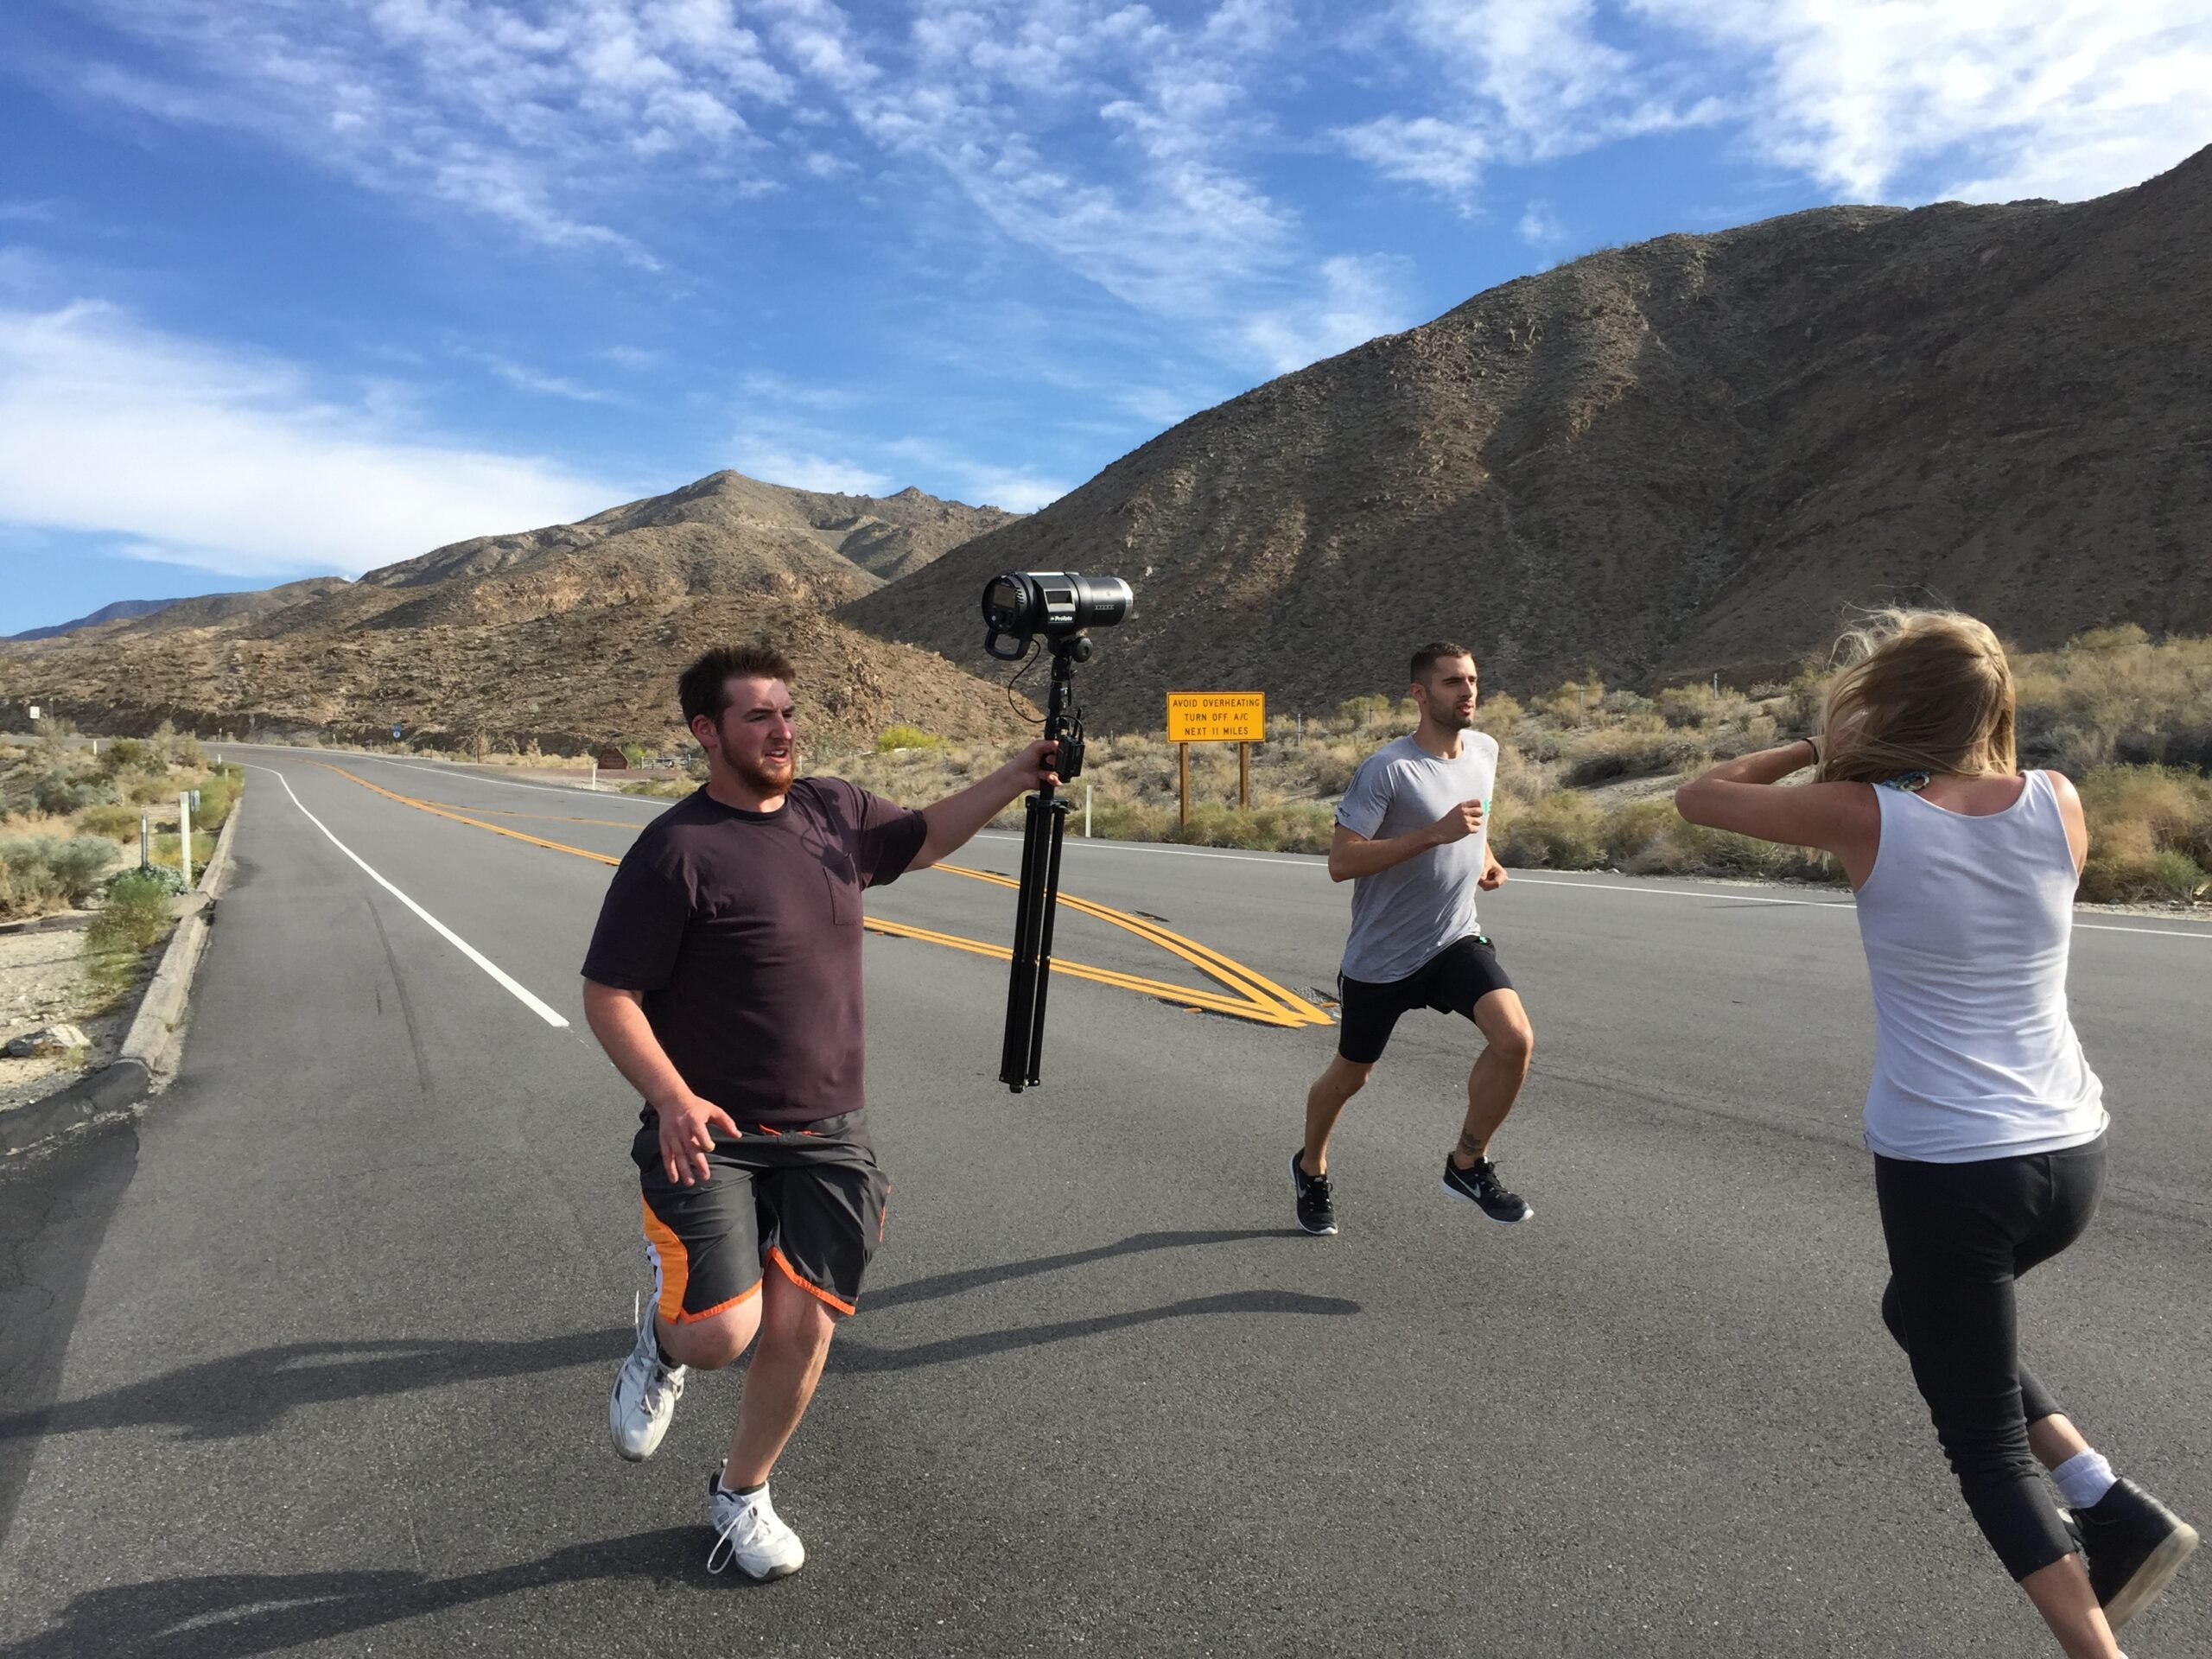 BTS shot showing of a man running while being photographed